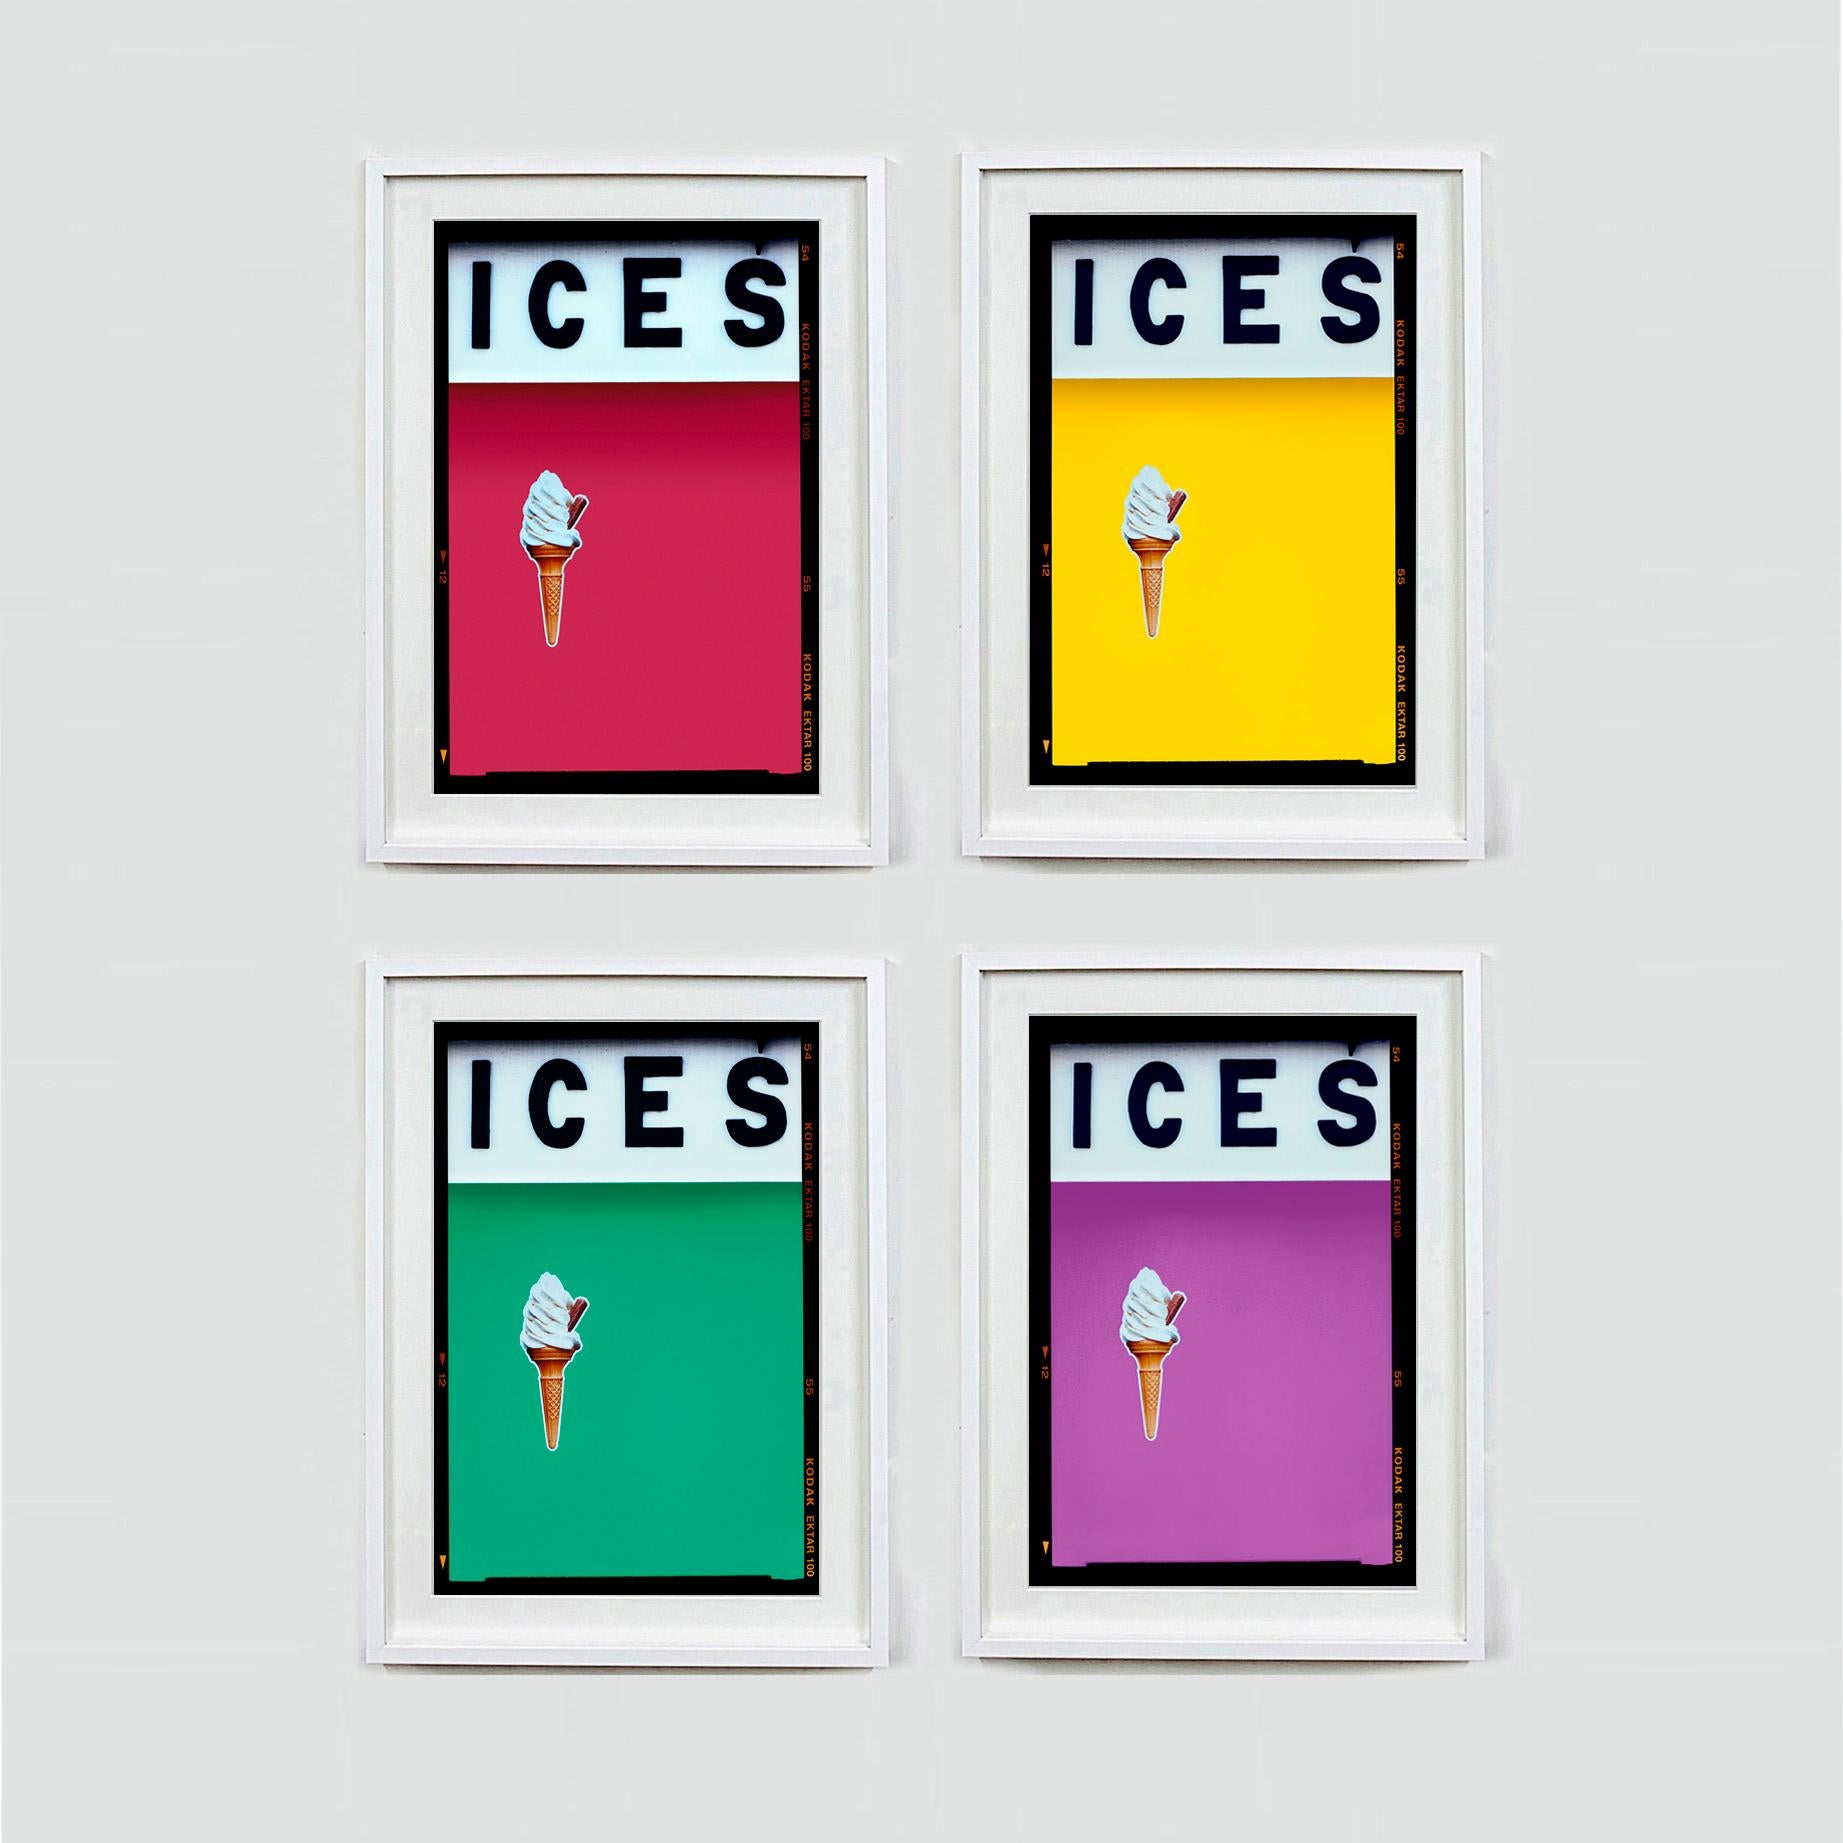 Ices (Raspberry), Bexhill-on-Sea - British seaside color photography For Sale 5